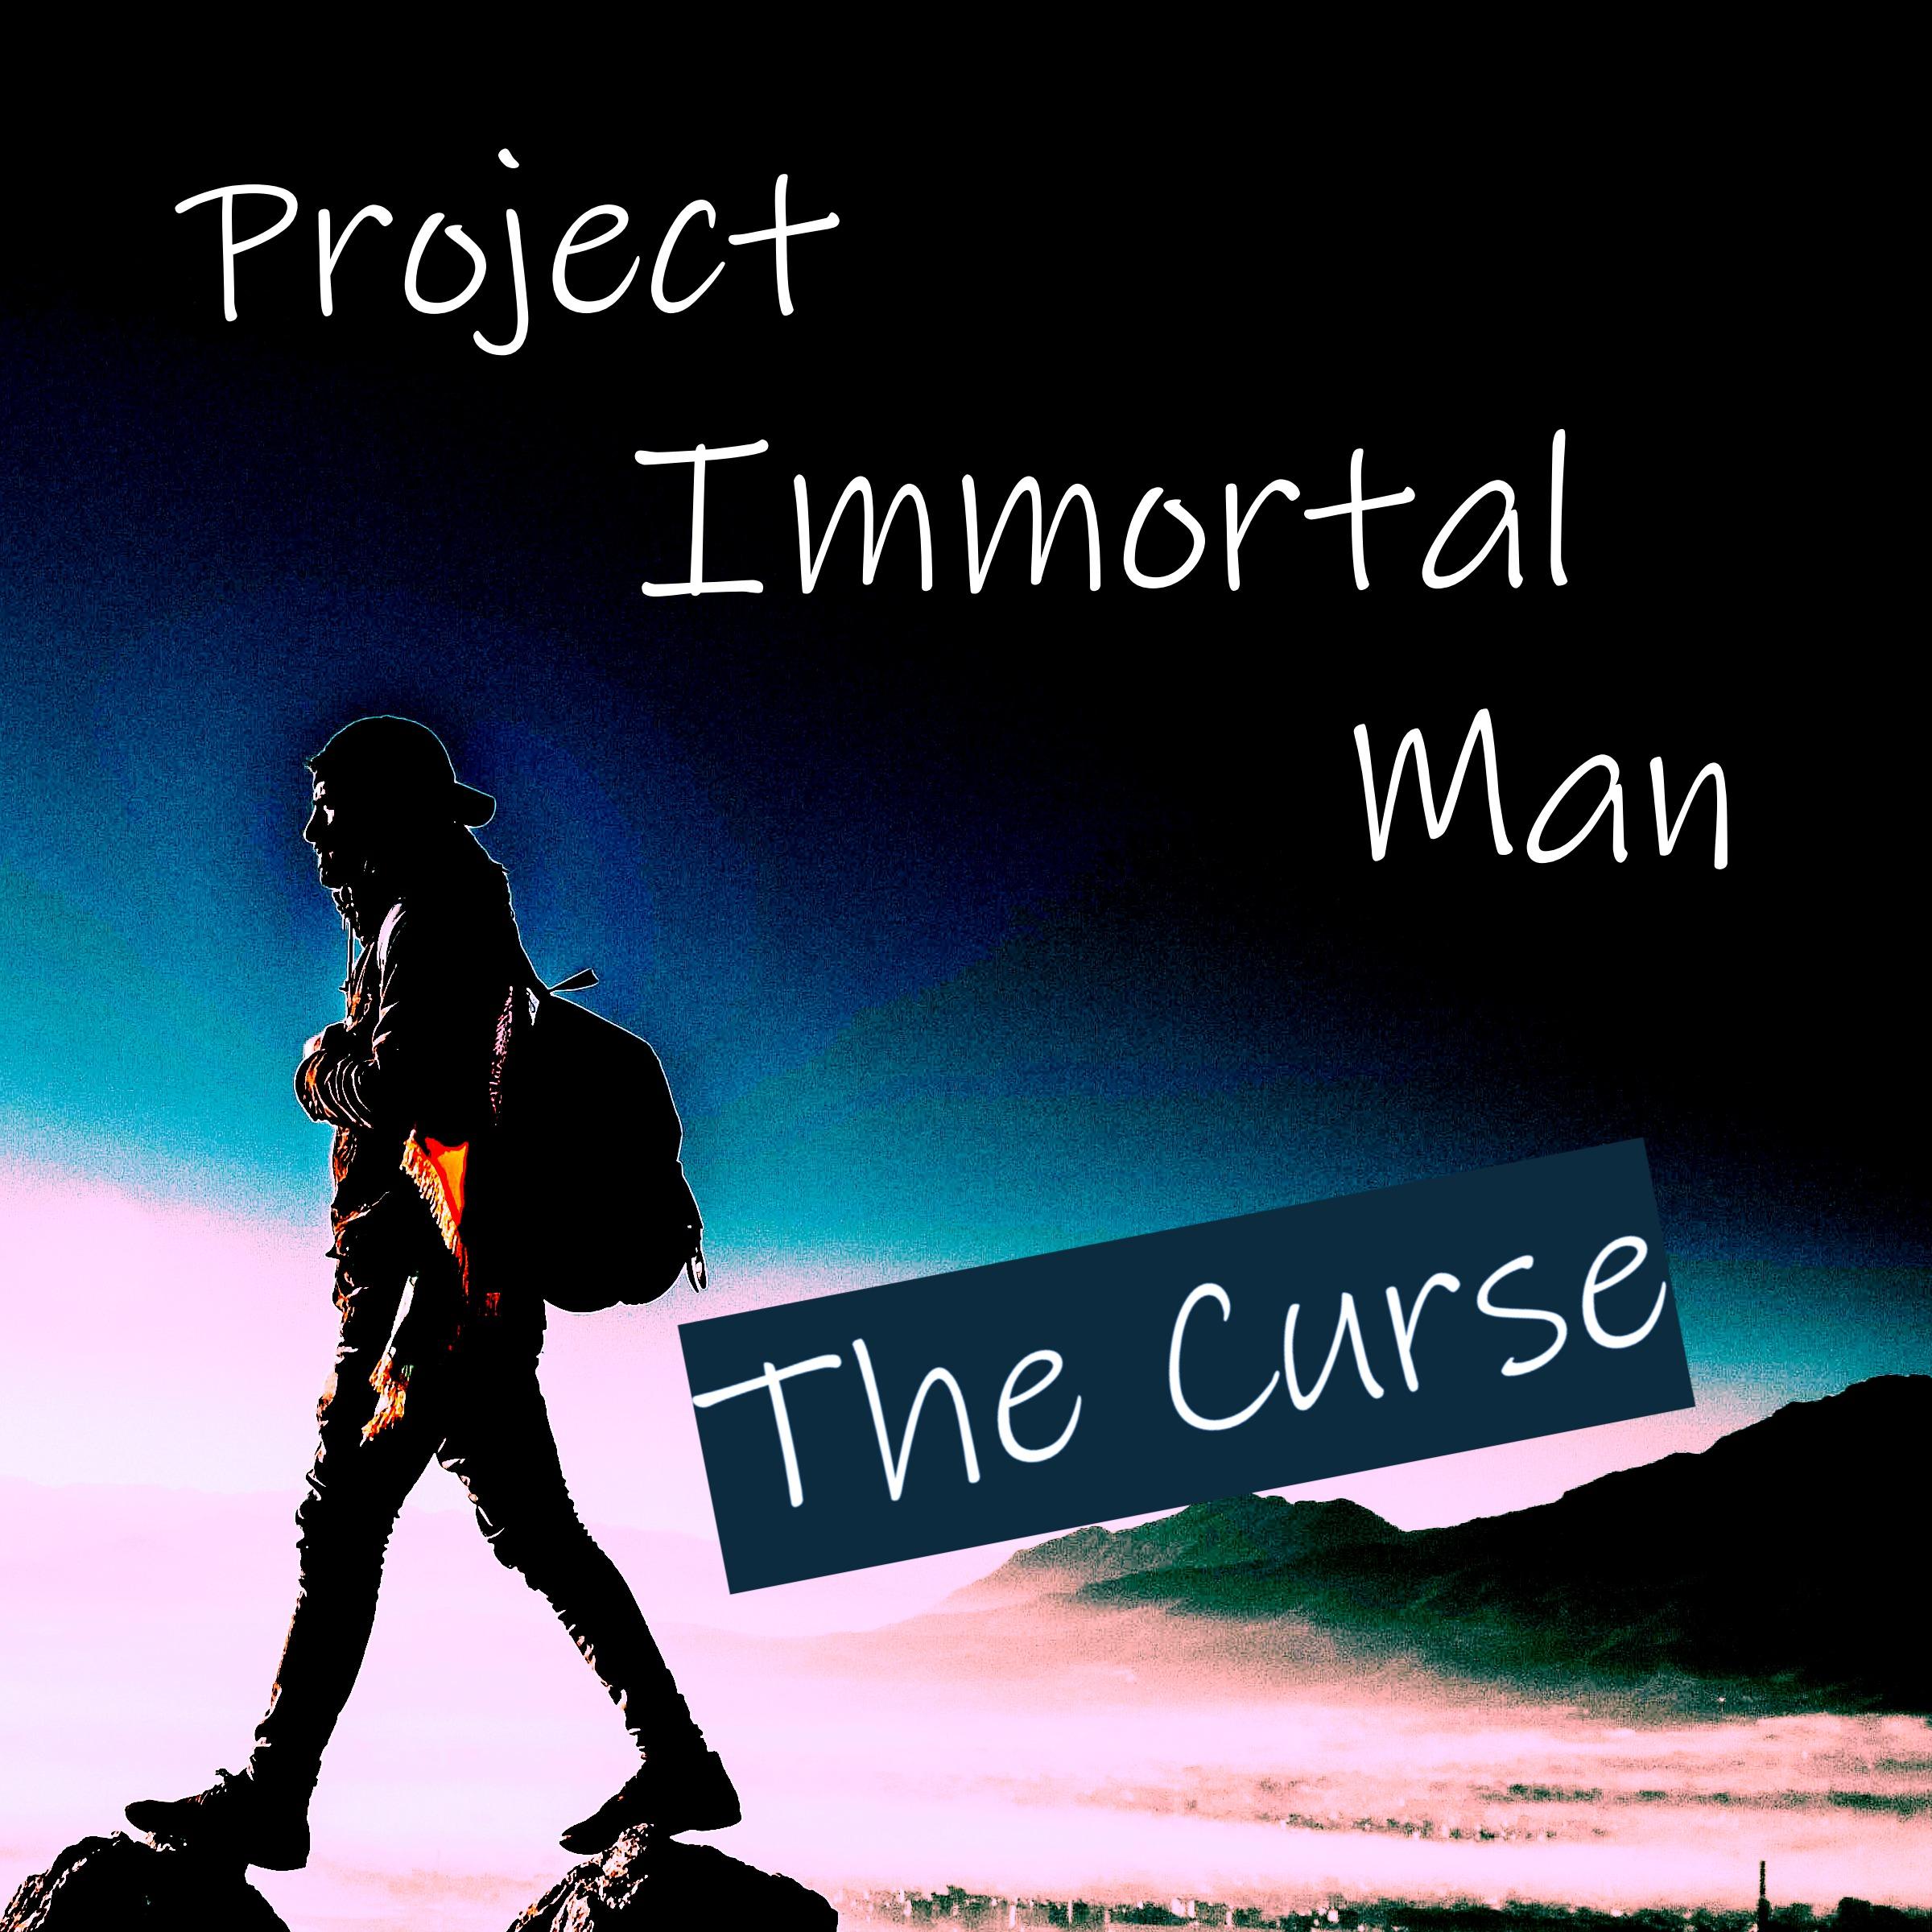 Project Immortal Man The Curse : Reason of stress and depression - A Short 15 minutes Lesson